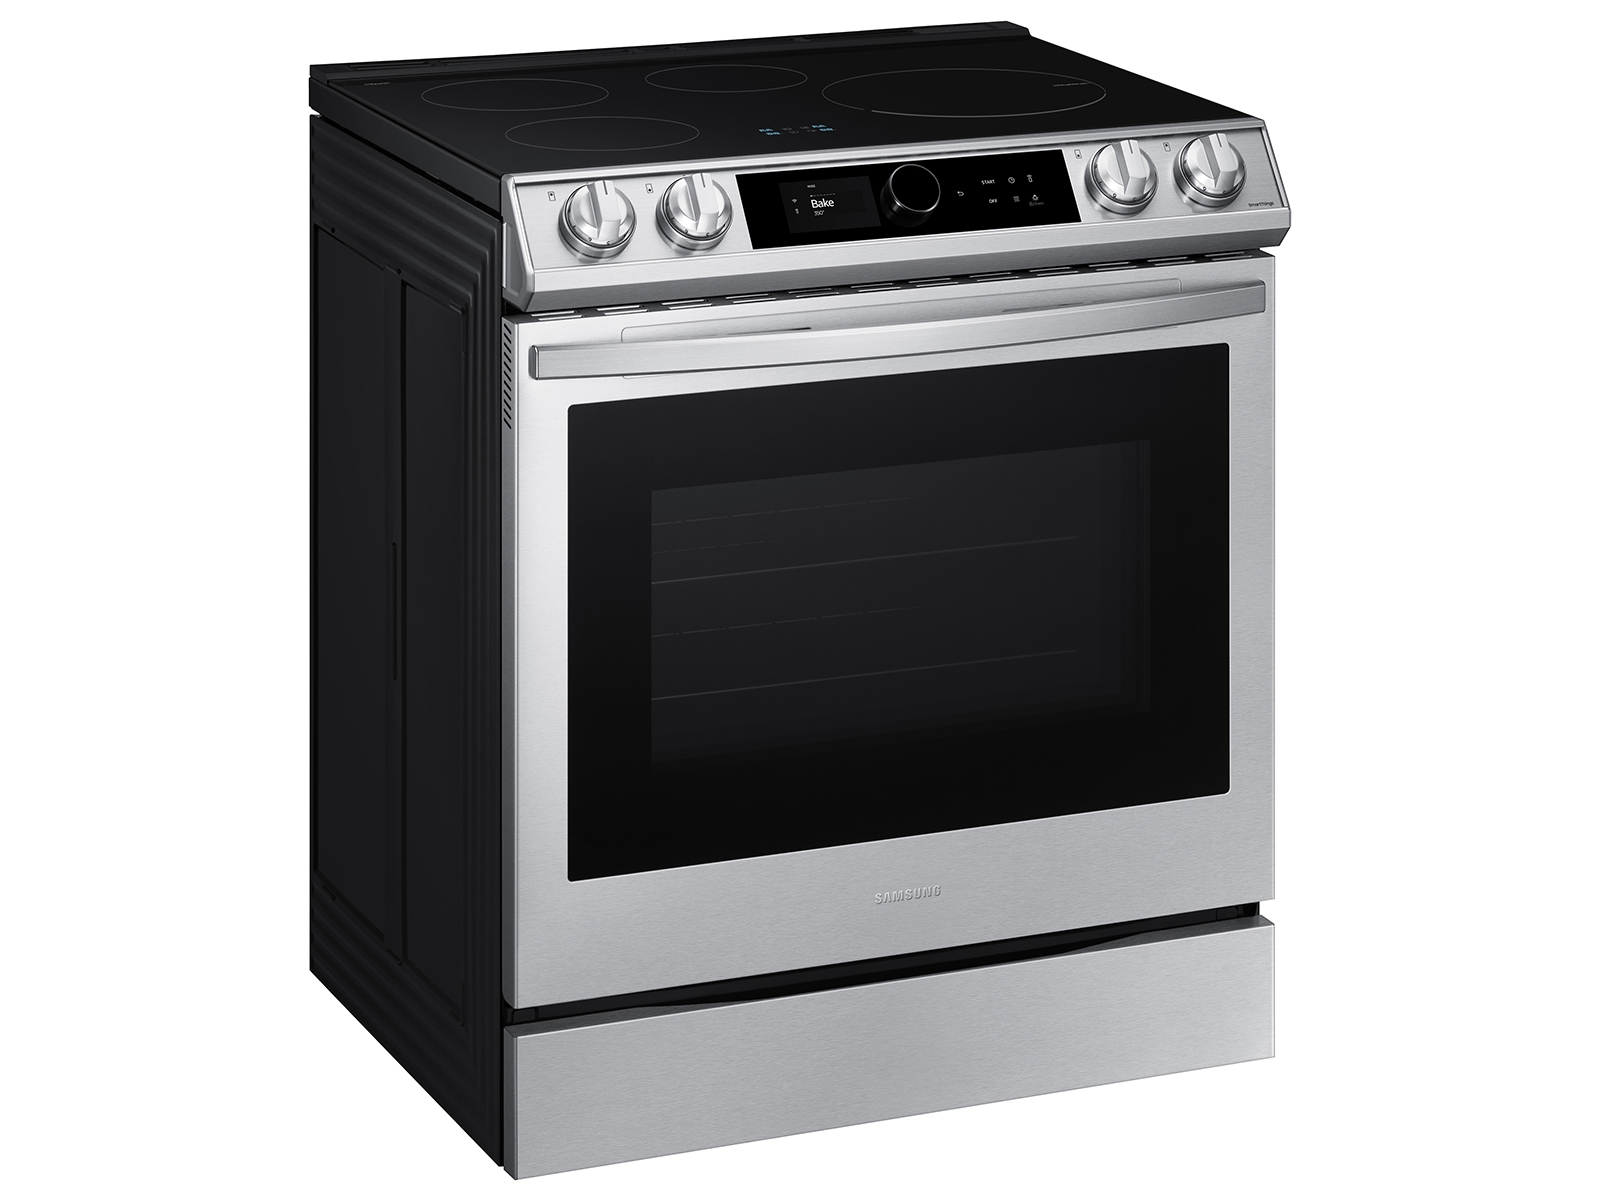 Samsung 30-inch Freestanding Induction Range with Air Fry and Convecti